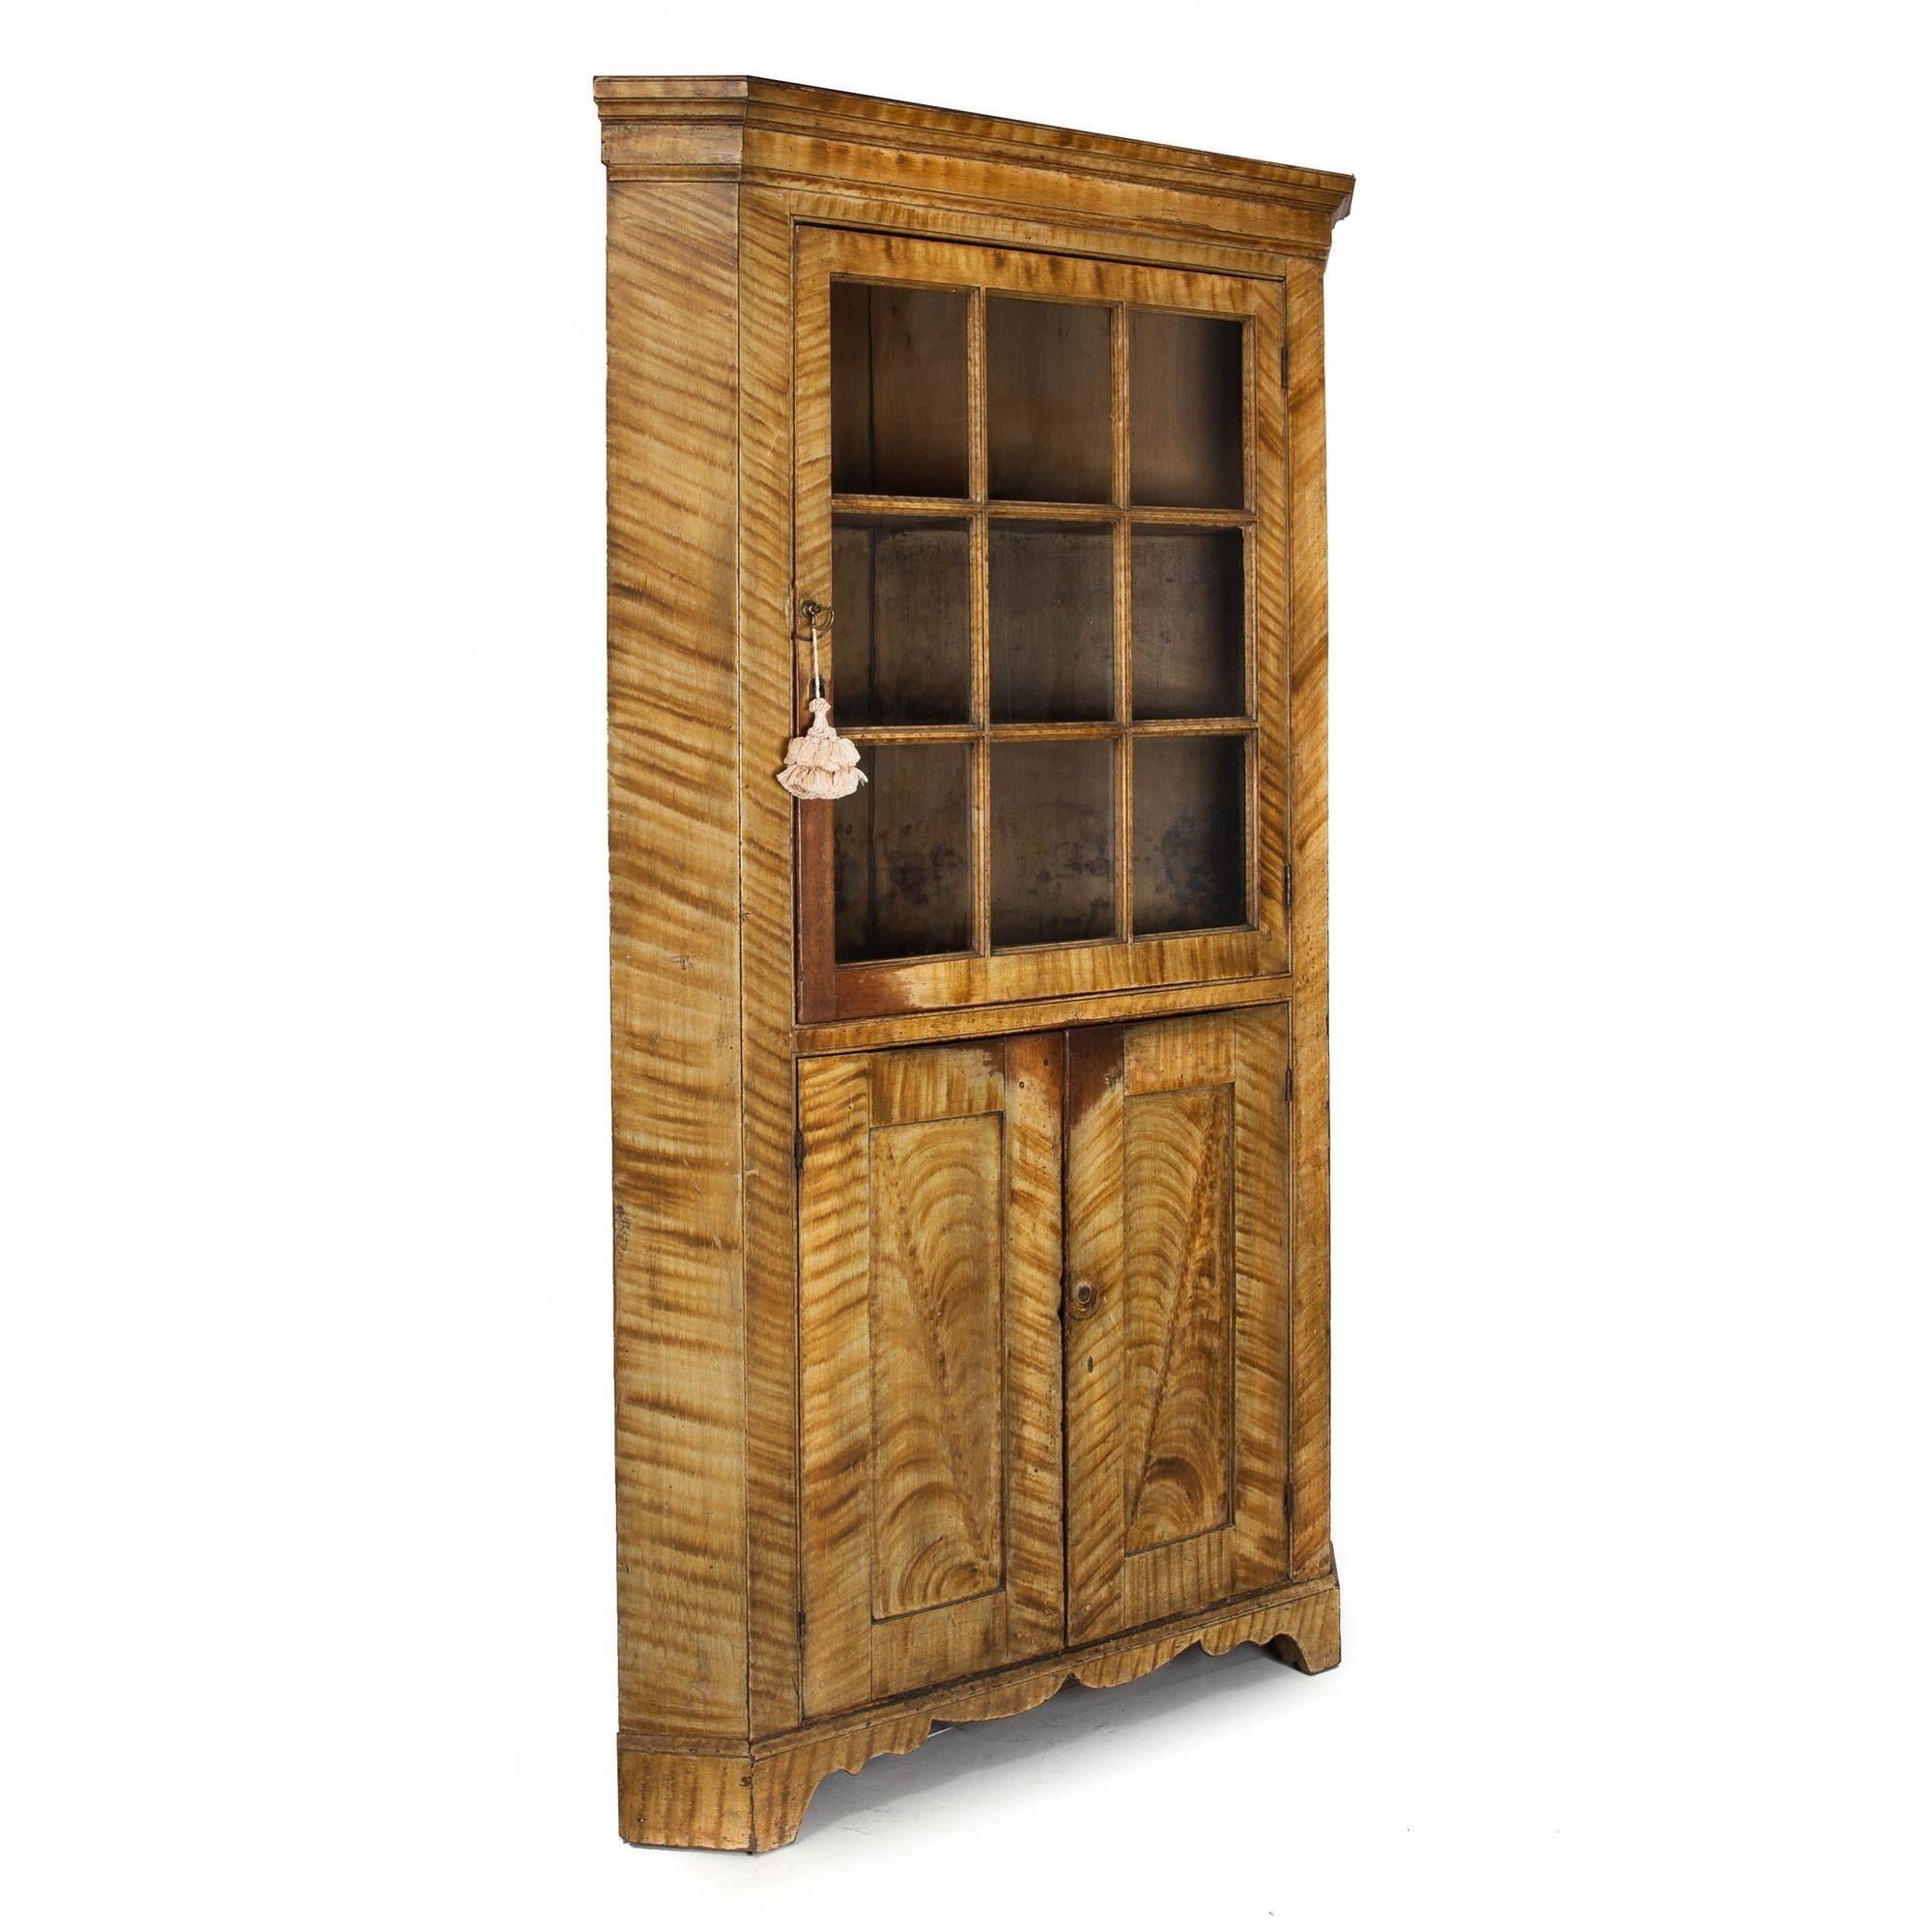 A VERY FINE AMERICAN GRAIN-PAINTED ONE-PIECE CORNER CUPBOARD
New England, circa 1805
Item # 305PXF05C 

An incredibly fine one-piece corner cupboard formerly acquired at Sotheby's in 2013 for $ 15,000. The original and beautifully worn surface is